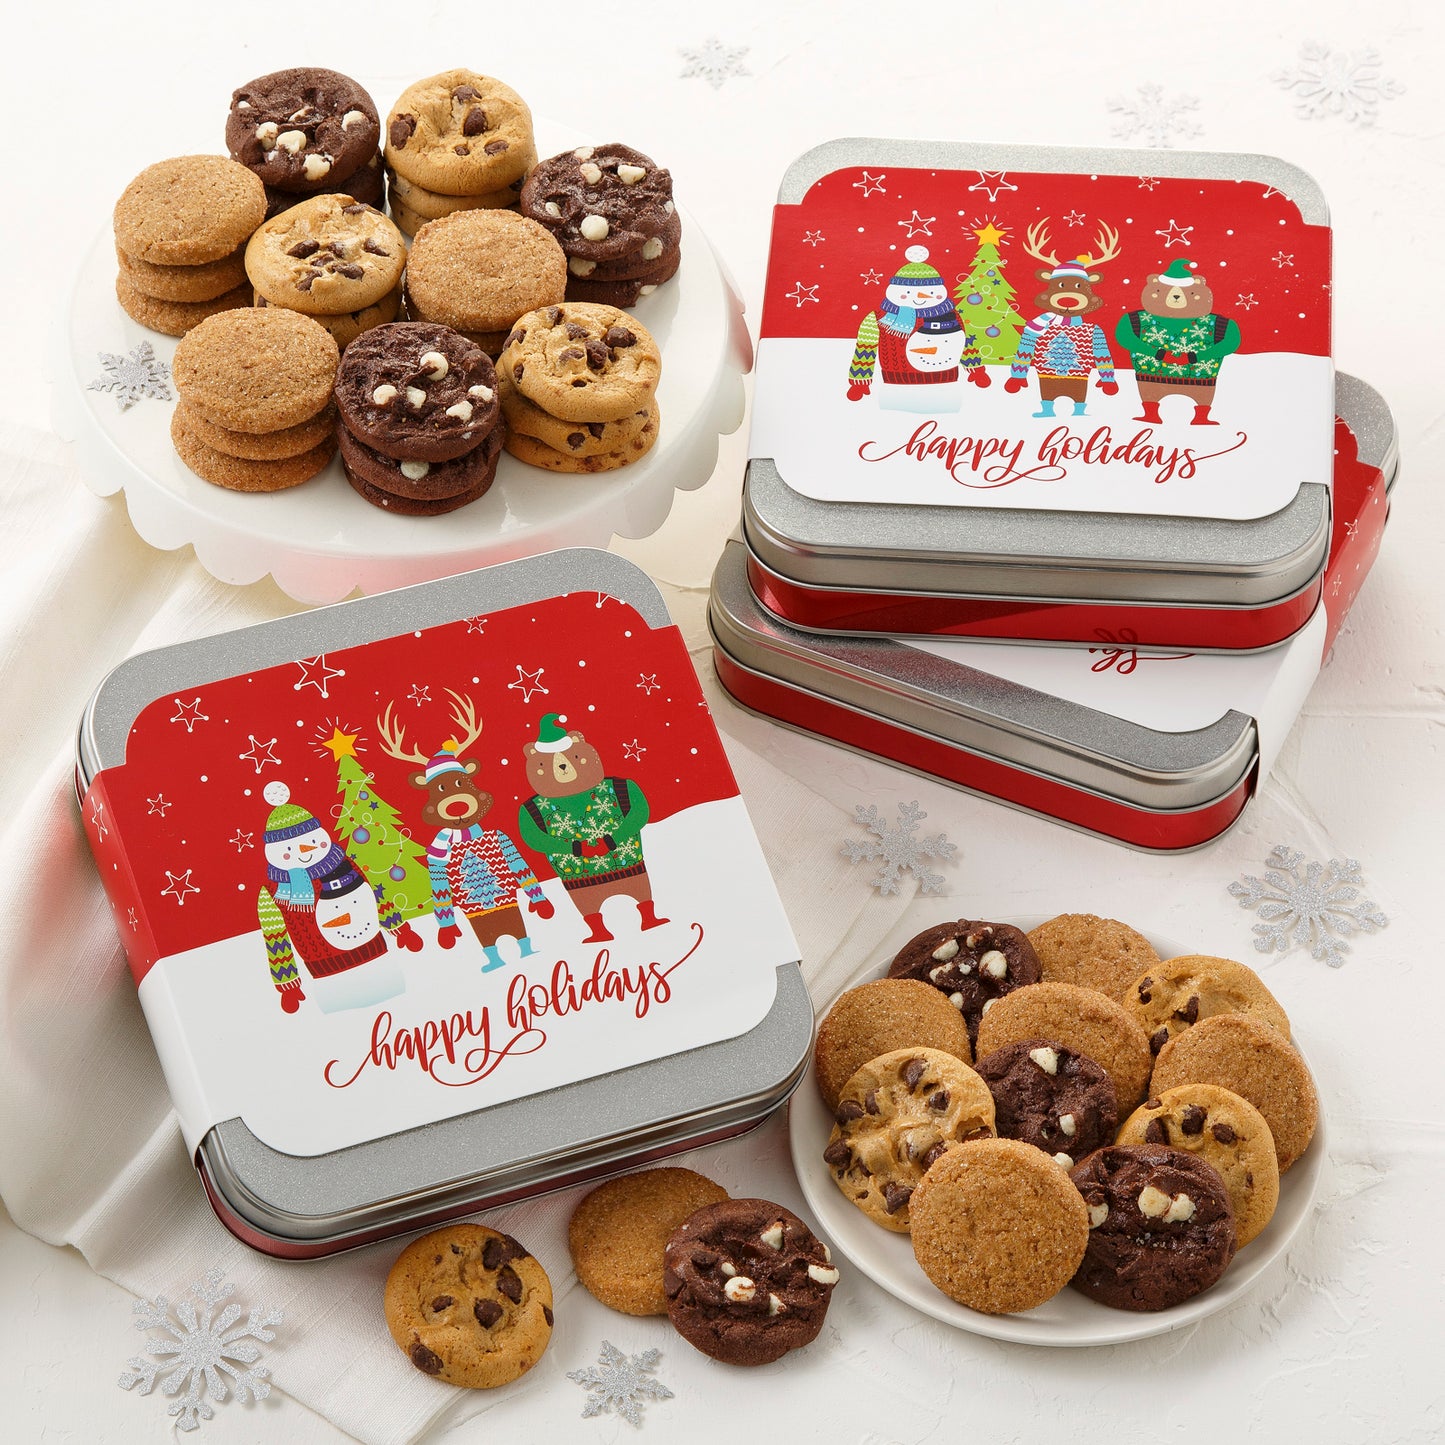 Three mini gift tins with a holiday-themed sleeve with fun woodland creatures on the top. These tins are surrounded by an assortment of Nibblers® bite-sized cookies